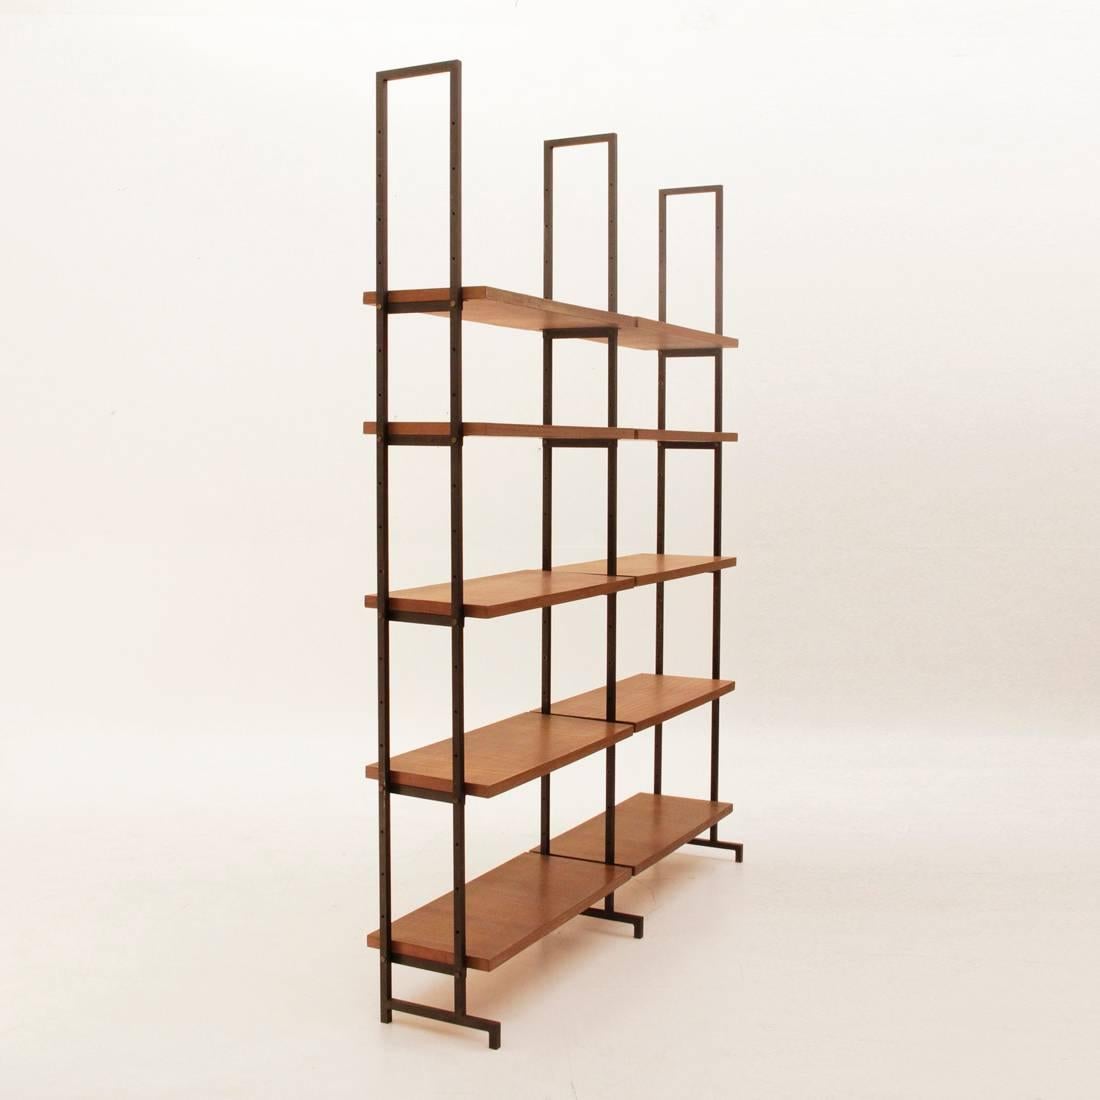 Italian Mid-Century book shelves,
made with three black paint metal upright and ten honeycomb shelves.
the bookcase must be fixed to the wall for better stability.
Dimensioni: Larghezza 164 cm - Profondità 33 cm - Altezza 220 cm.